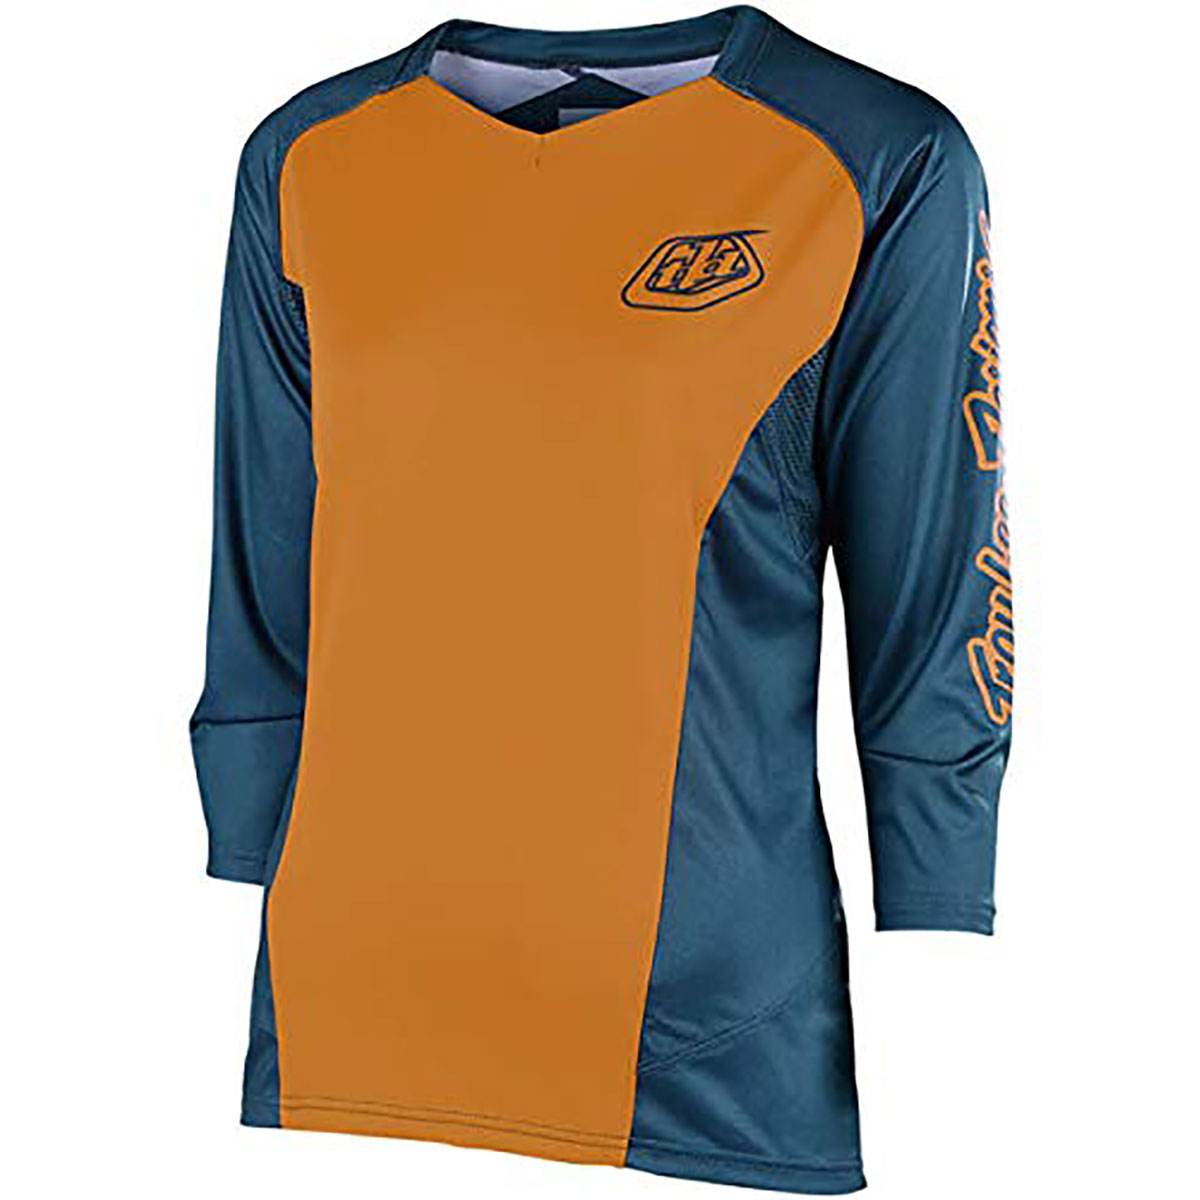 Troy Lee Designs Ruckus Womens Off-Road BMX Cycling Jersey